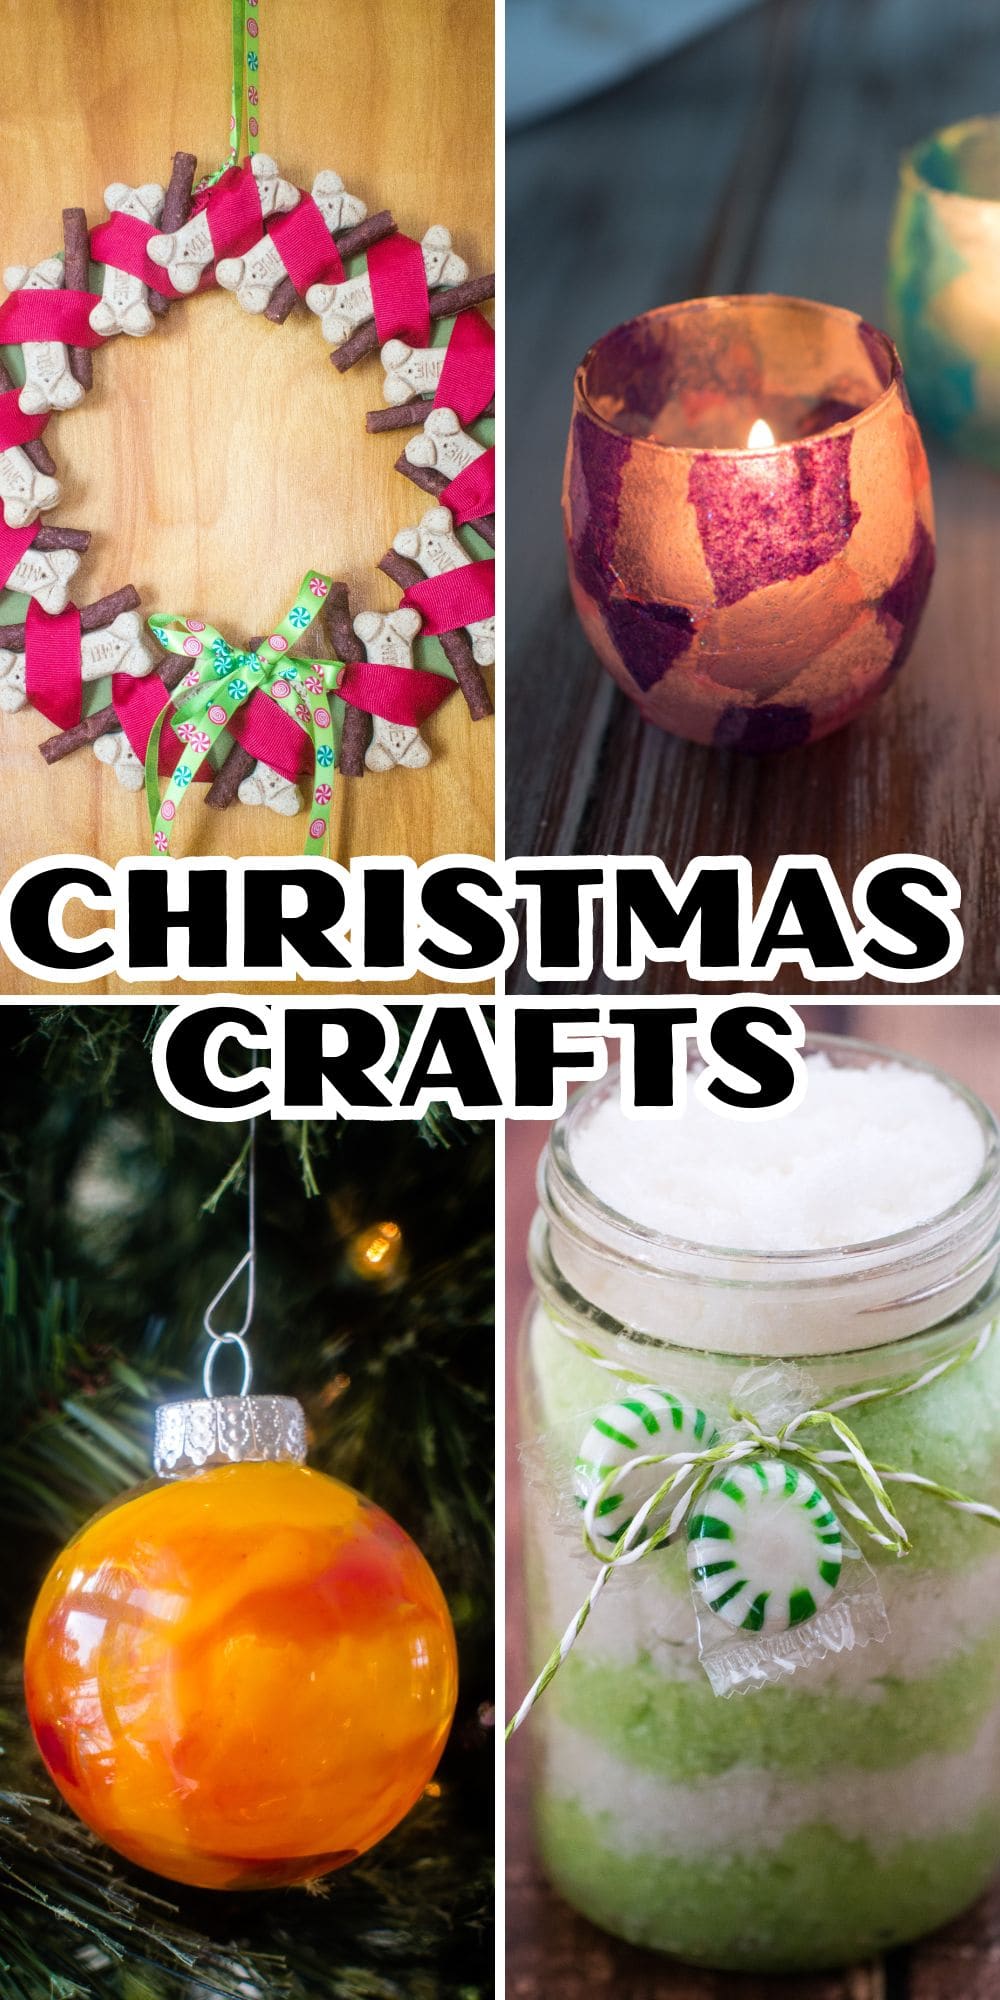 Holiday crafts for kids.